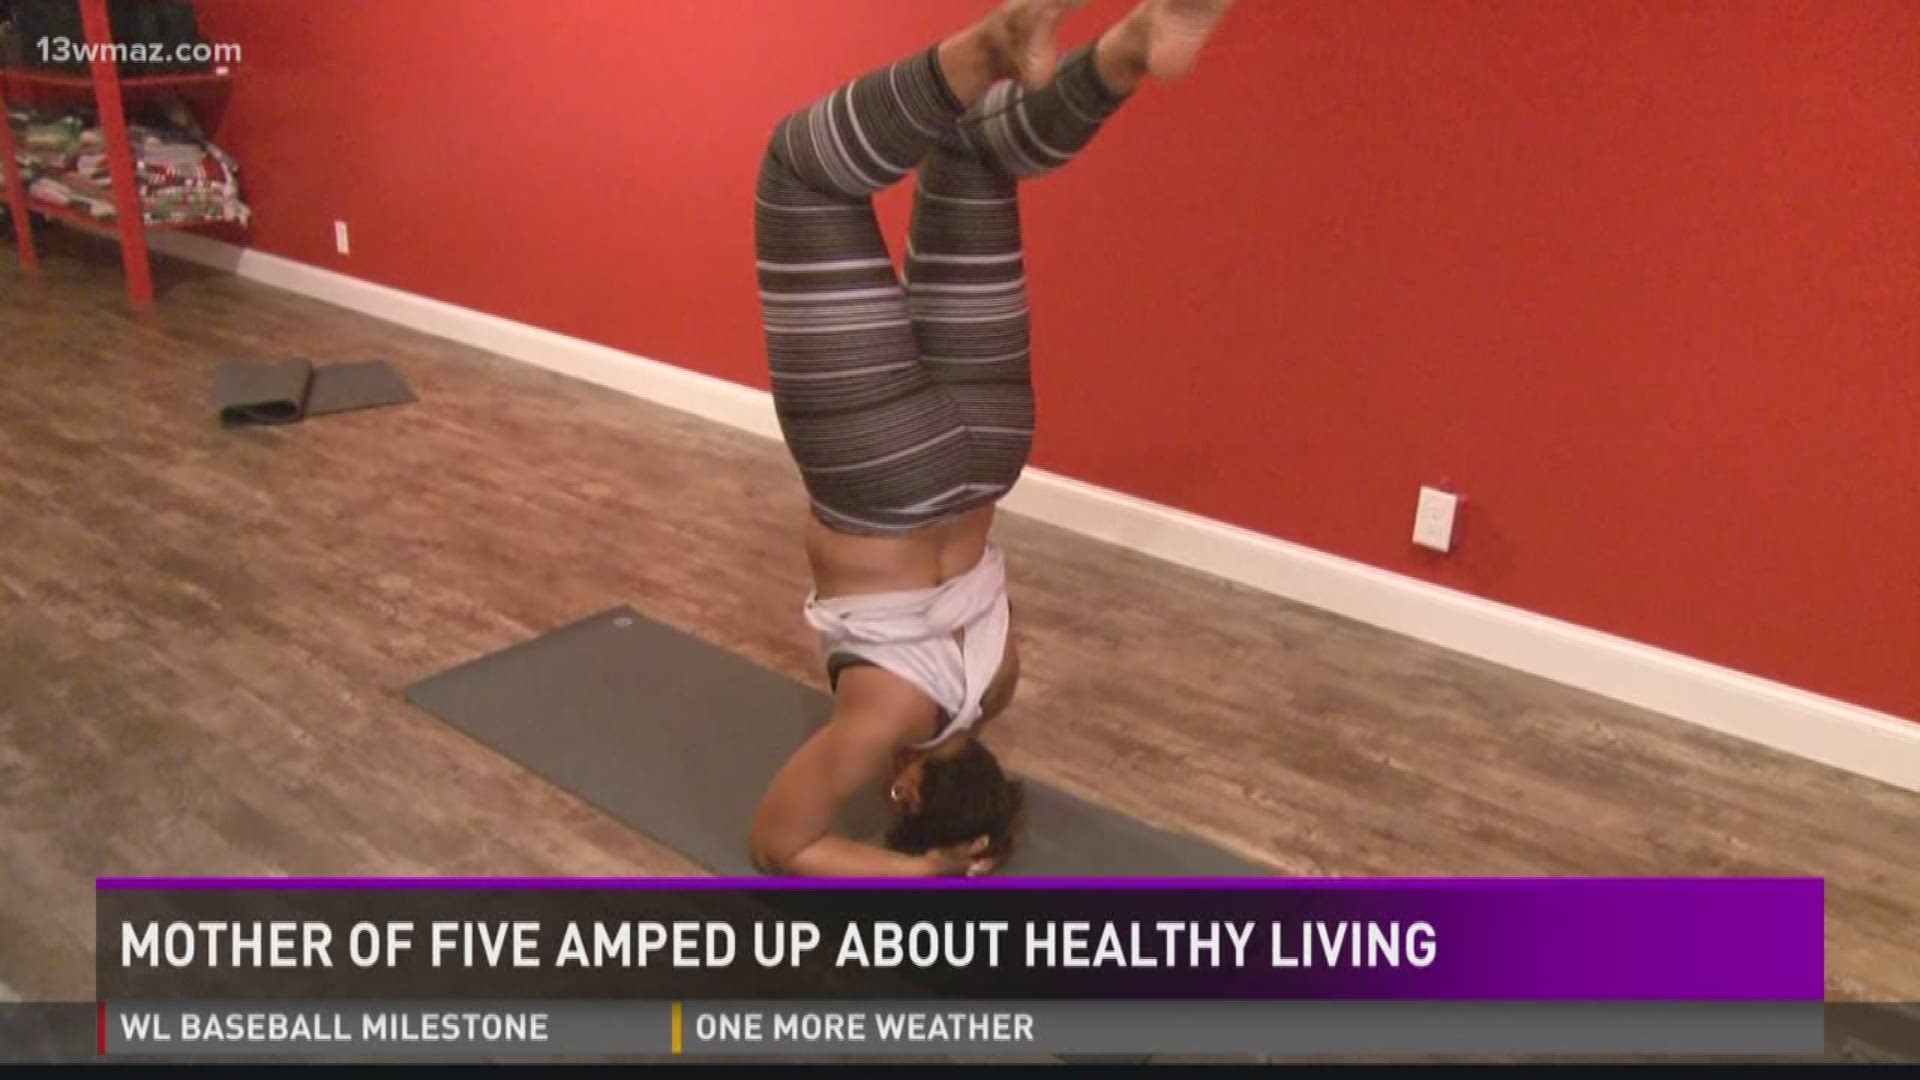 AMPED UP: Mom of 5 serious about healthy living